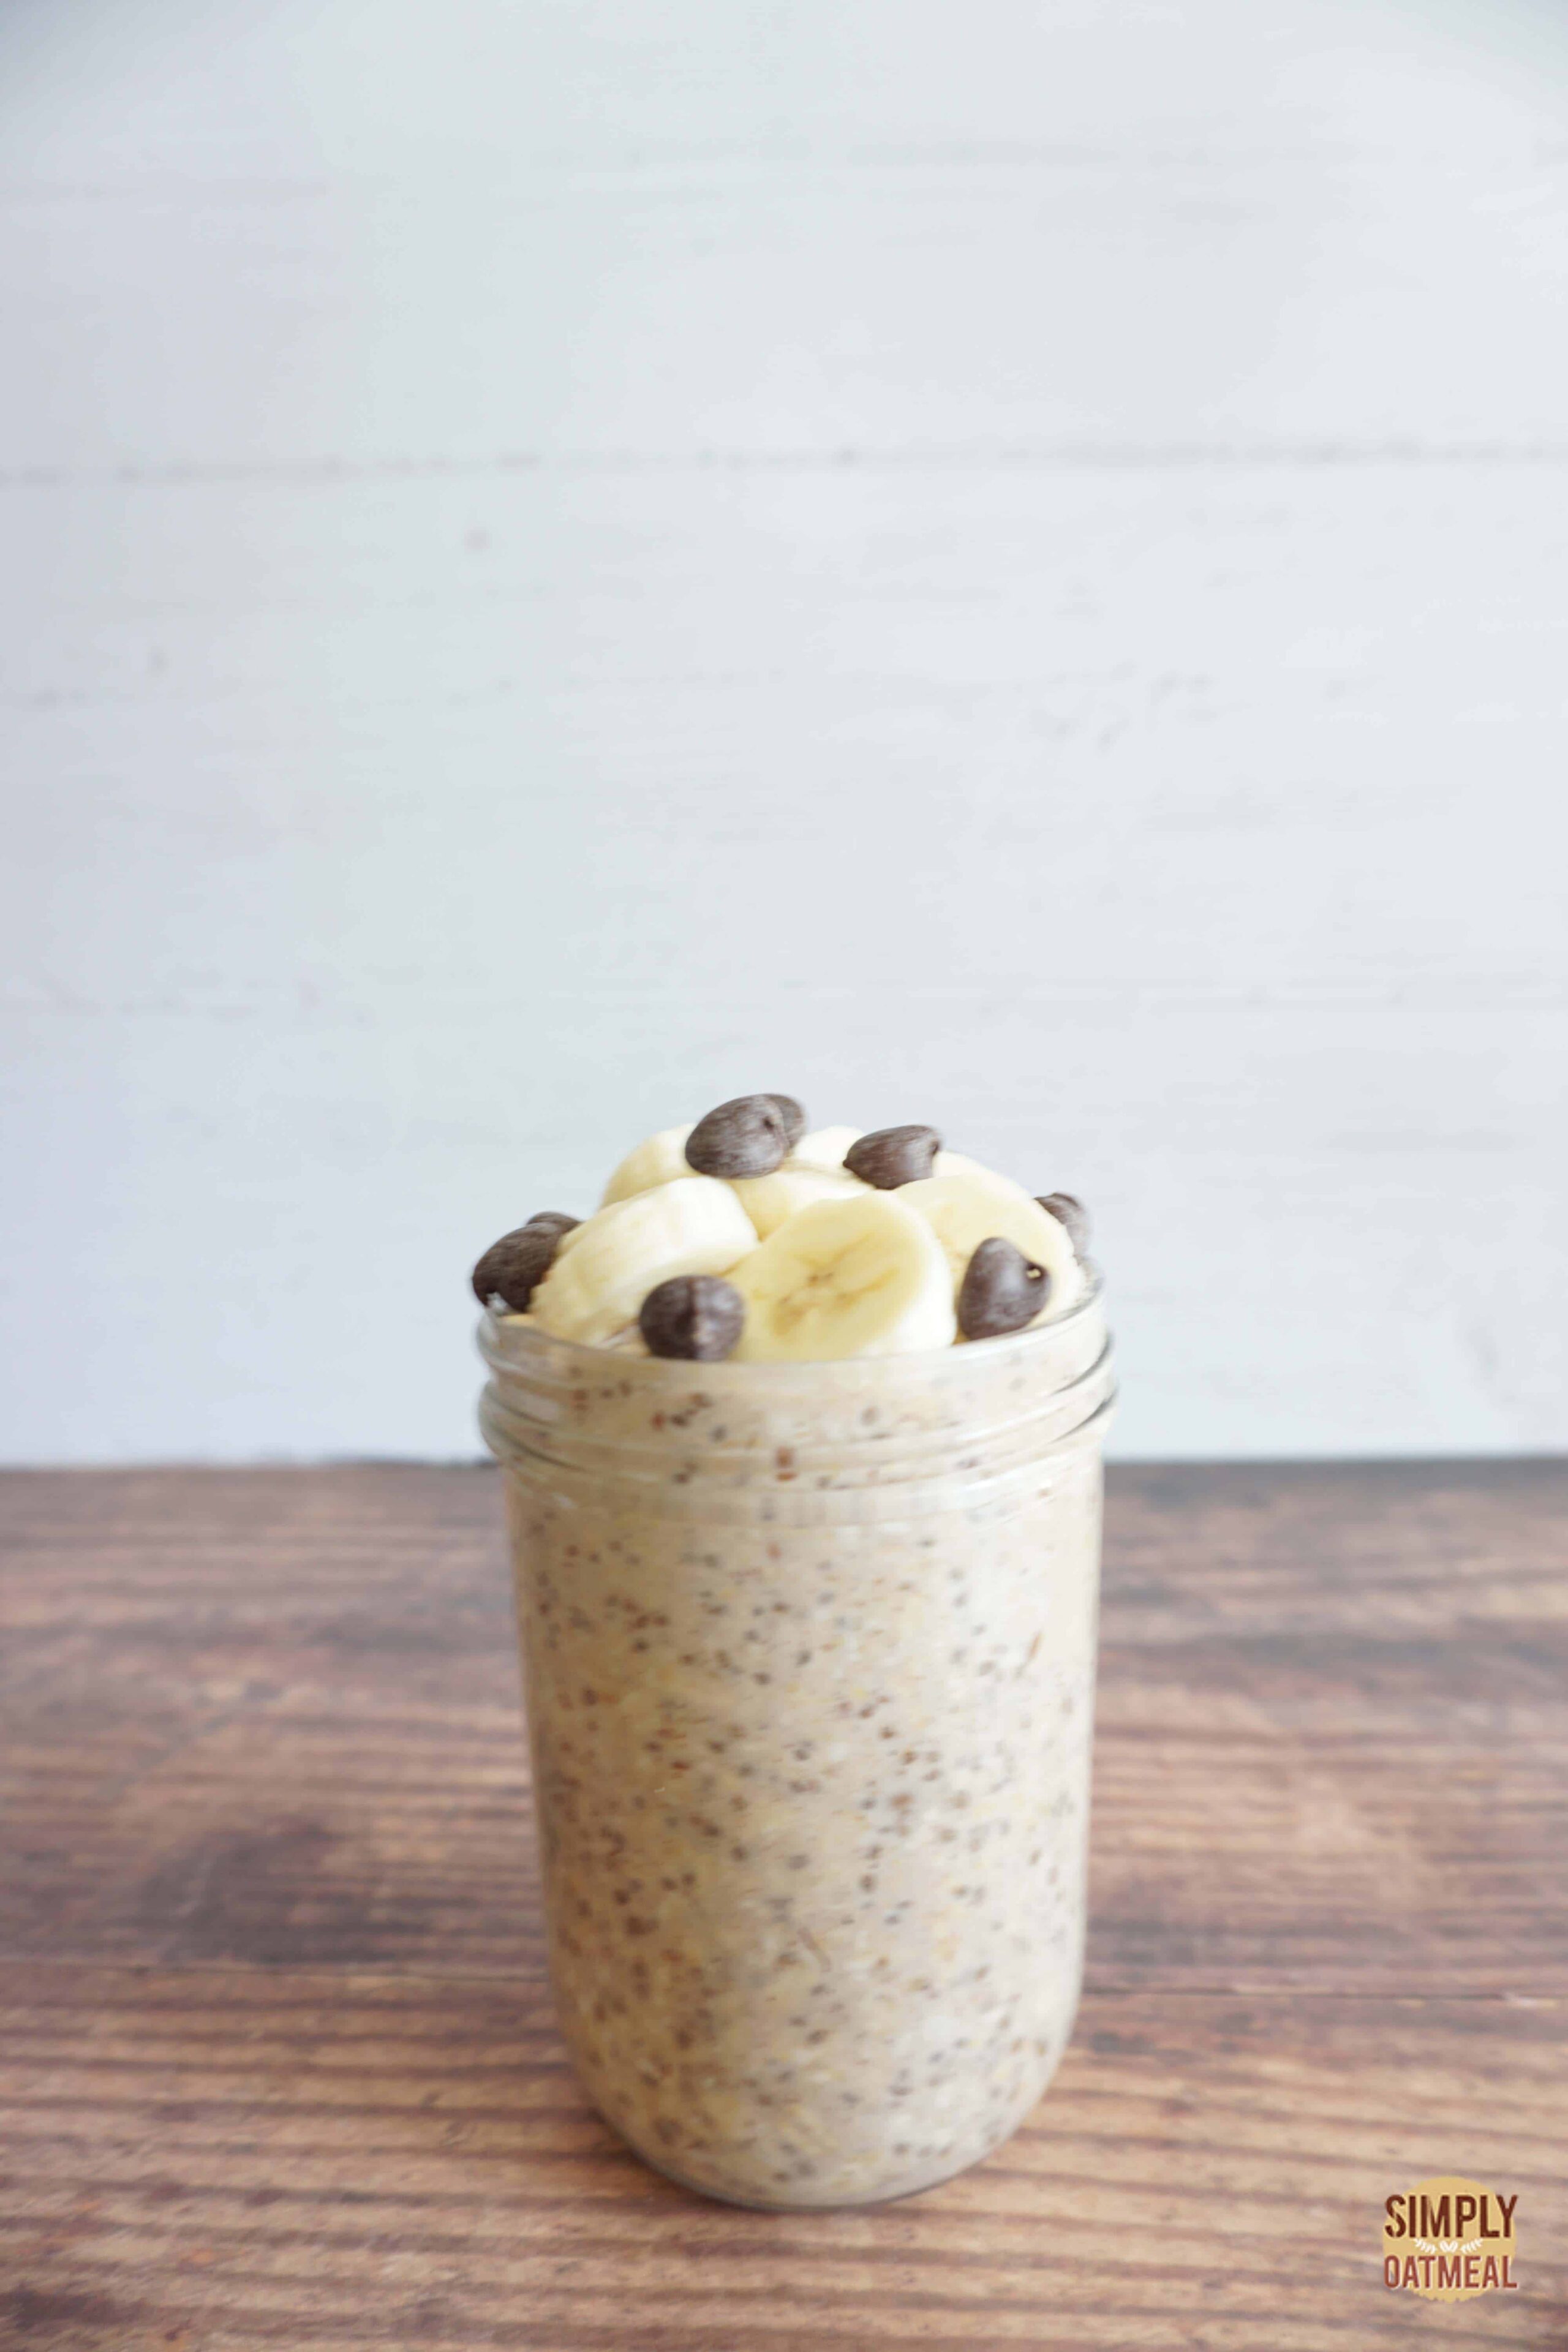 Chocolate chip banana overnight oats served in a meal prep container.